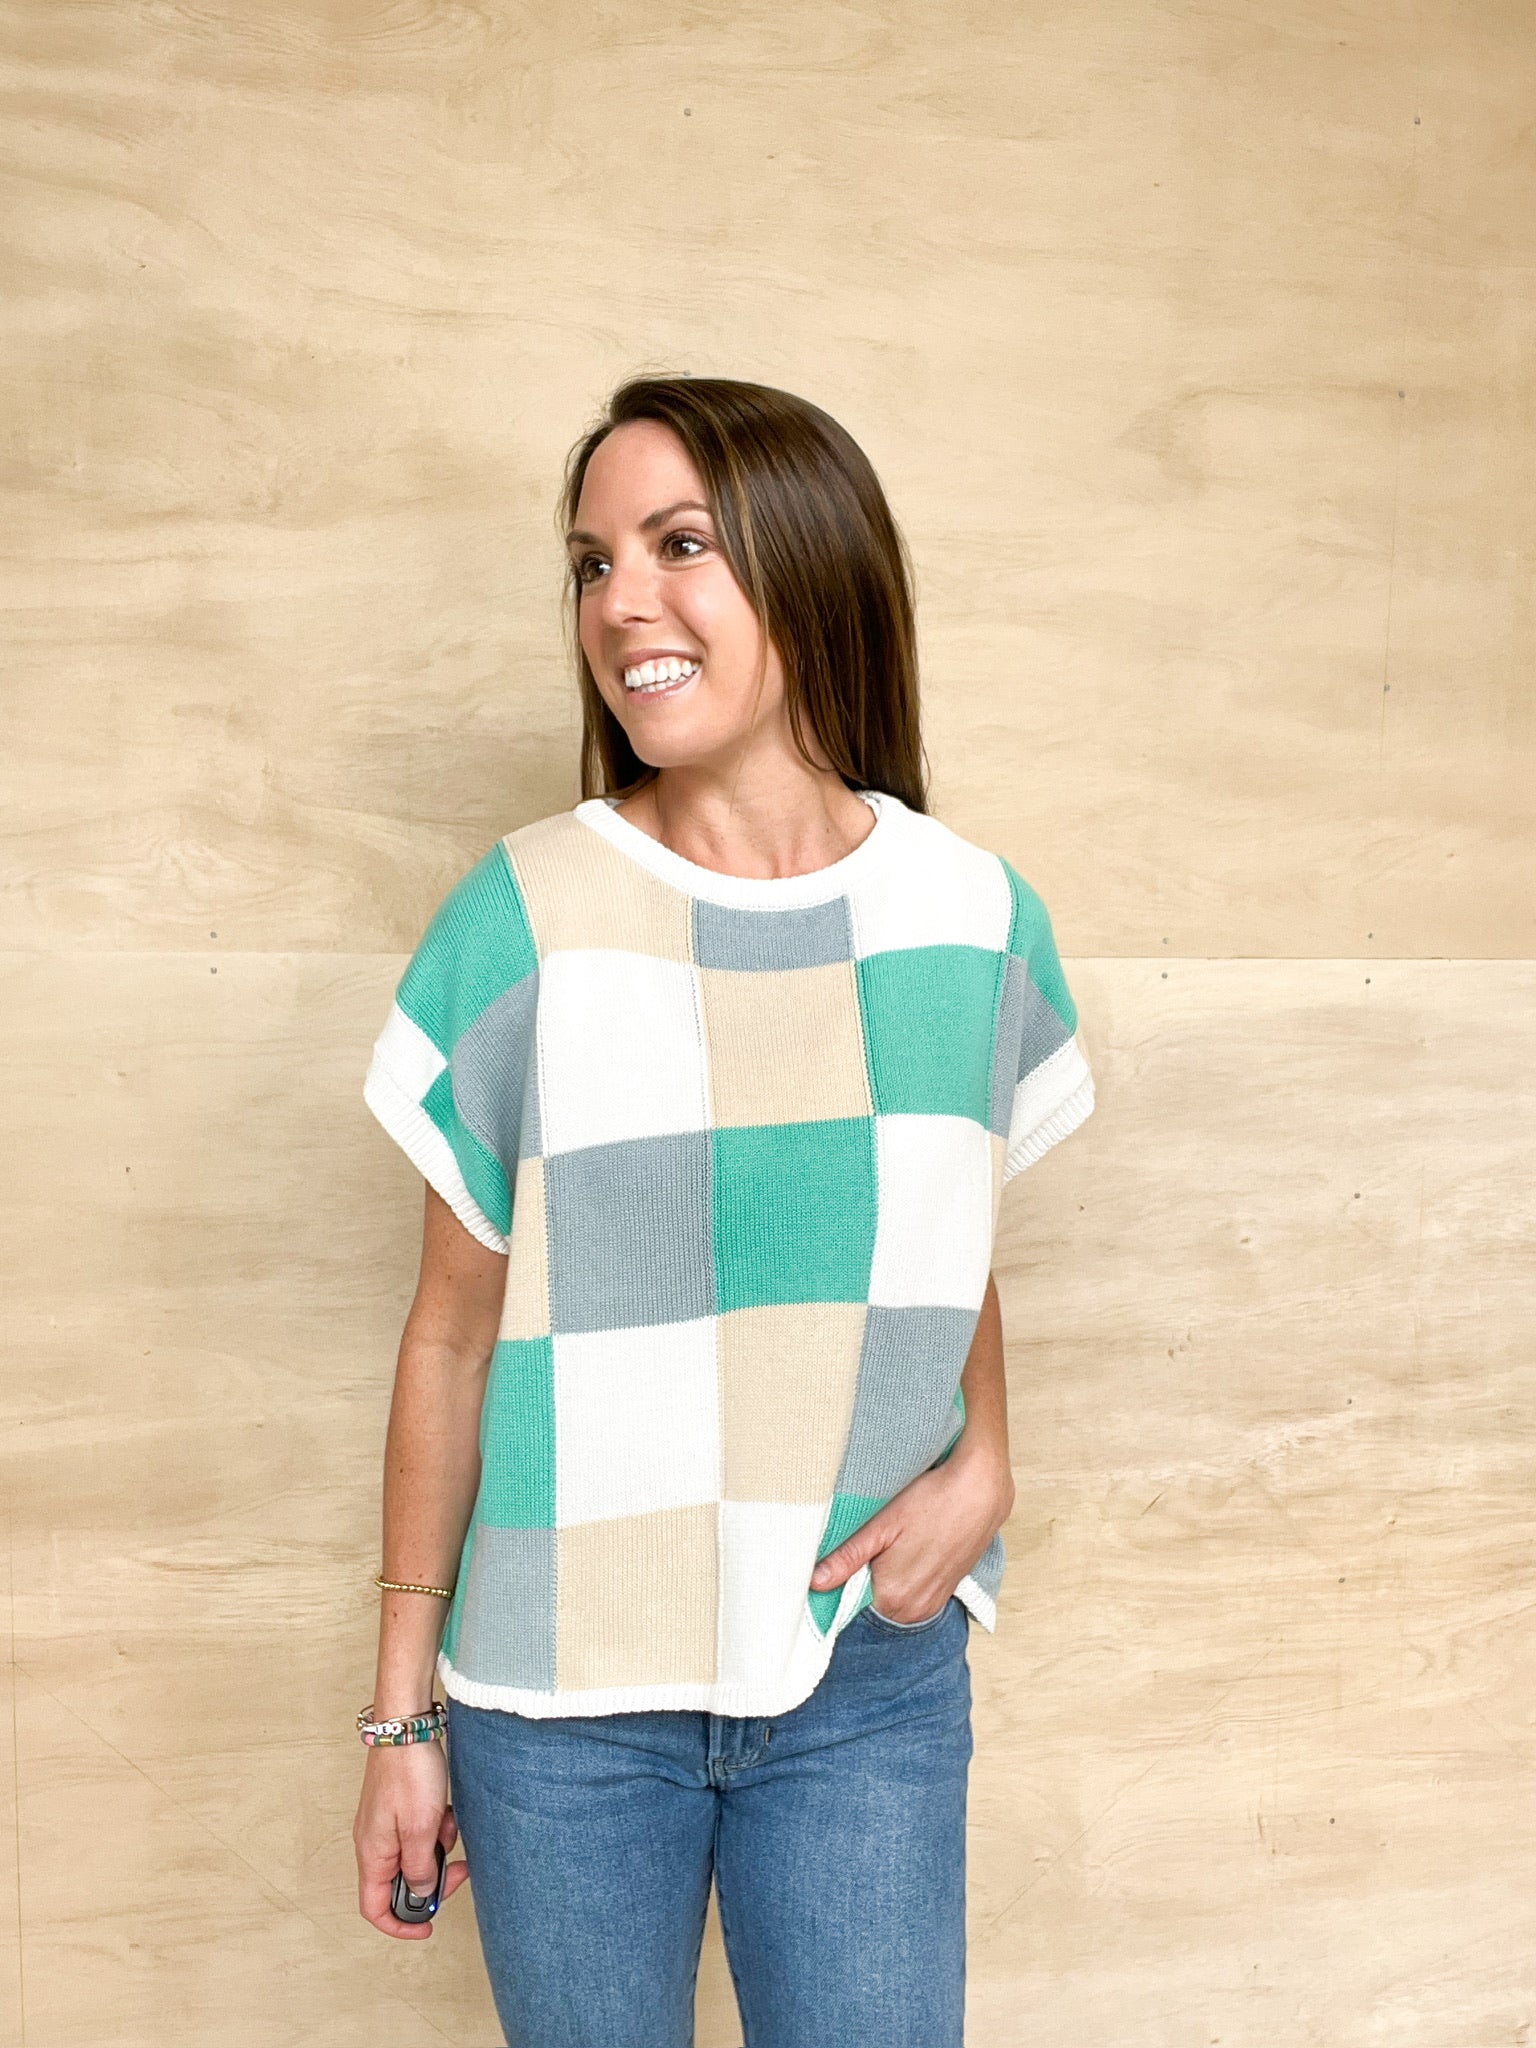 Short sleeve lightweight sweater, checkered detail featuring tan, grey, and teal squares, oversized fit, soft material